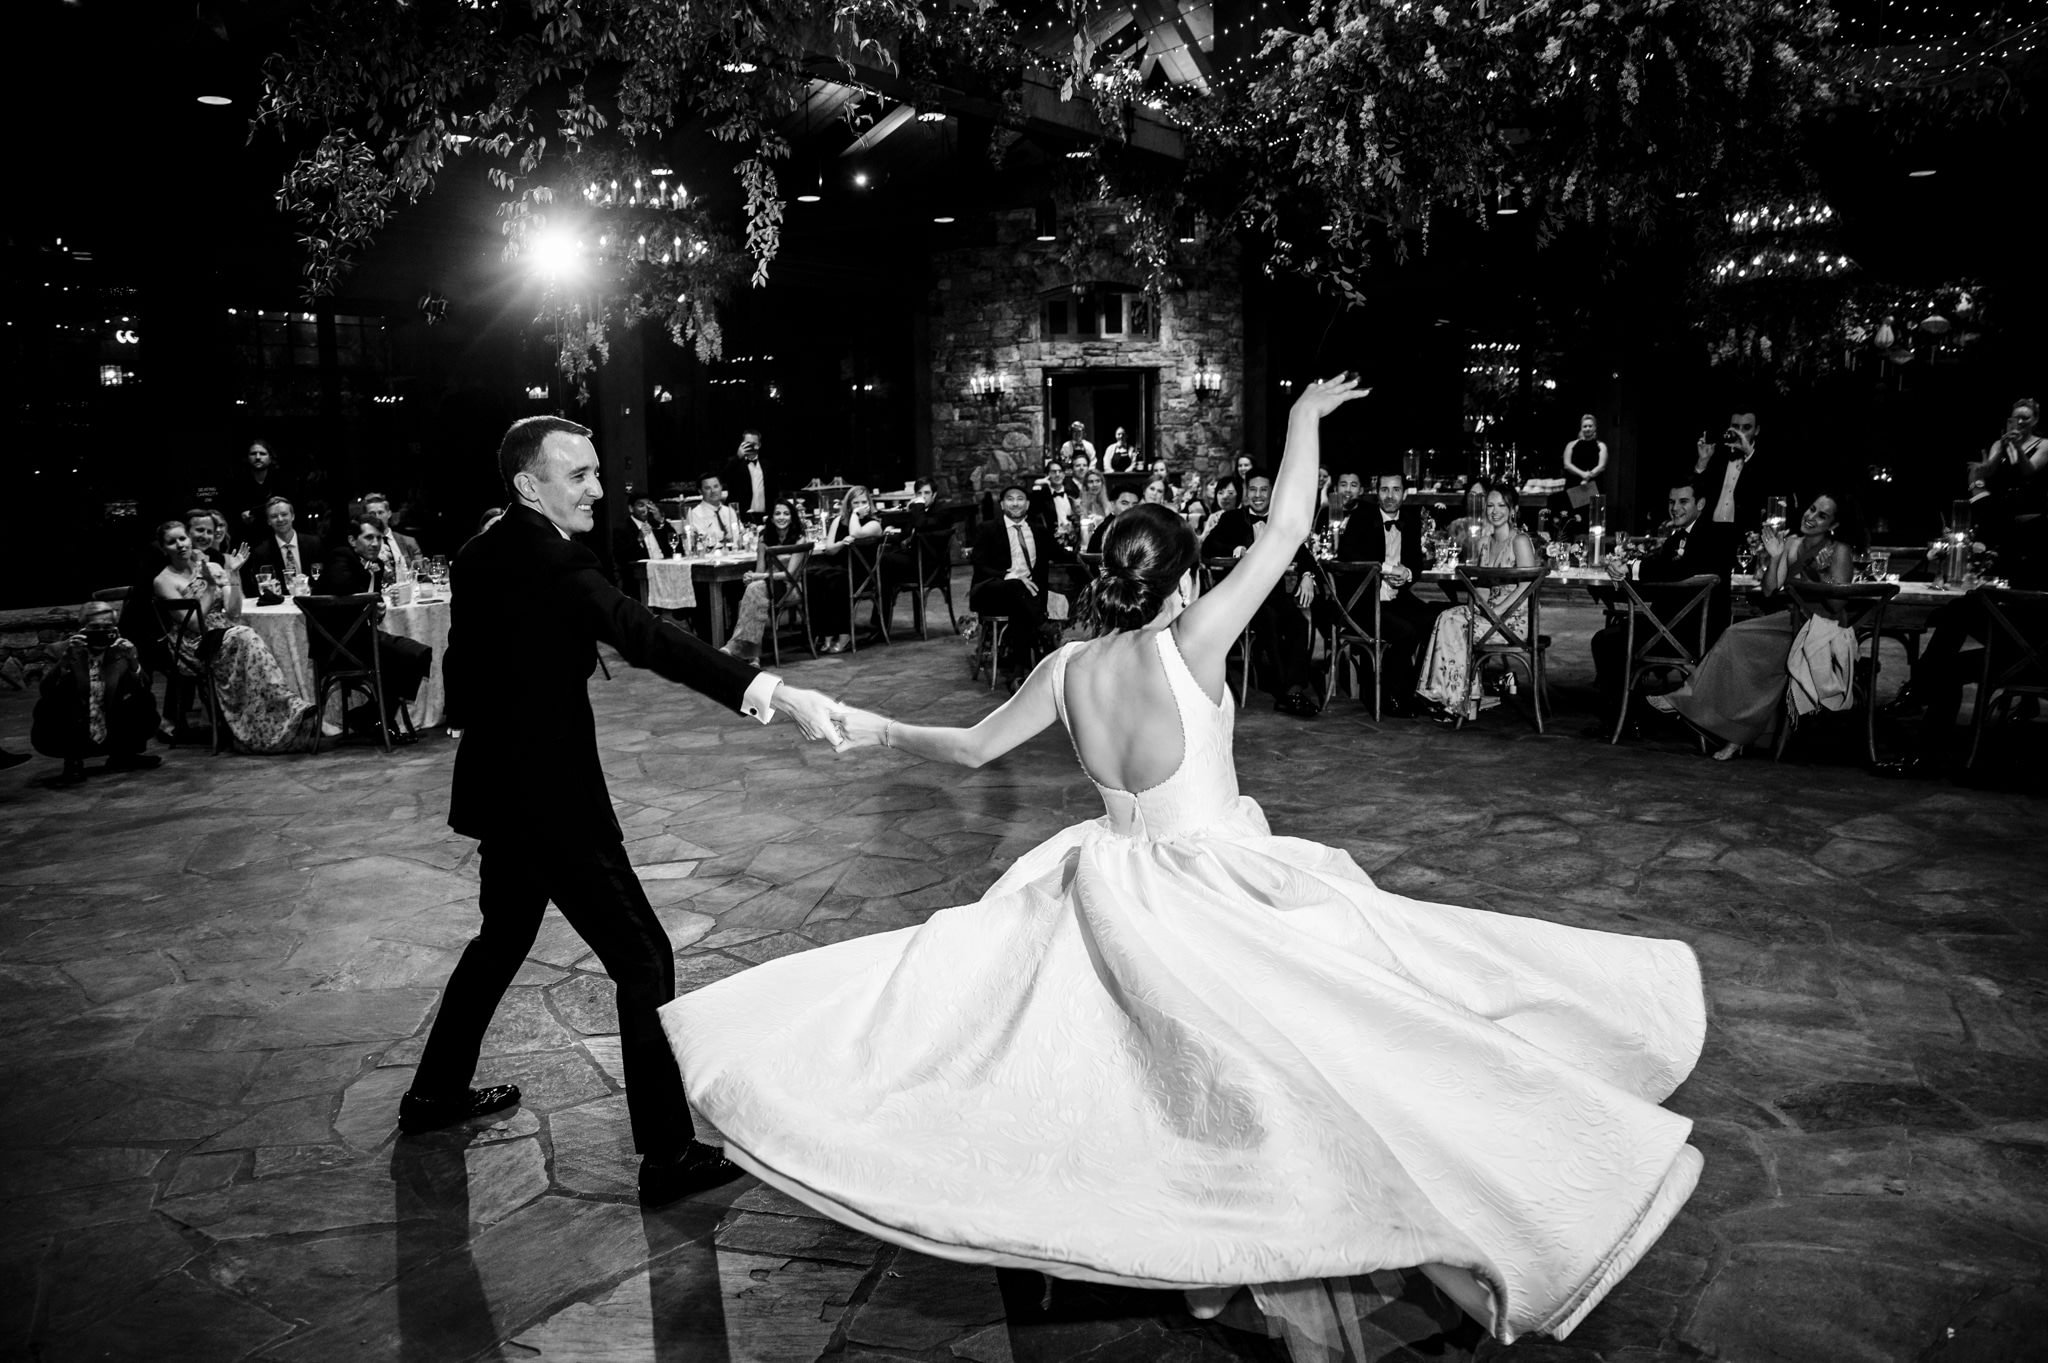 Asheville NC photographer captures a bride and groom dancing at their wedding reception.